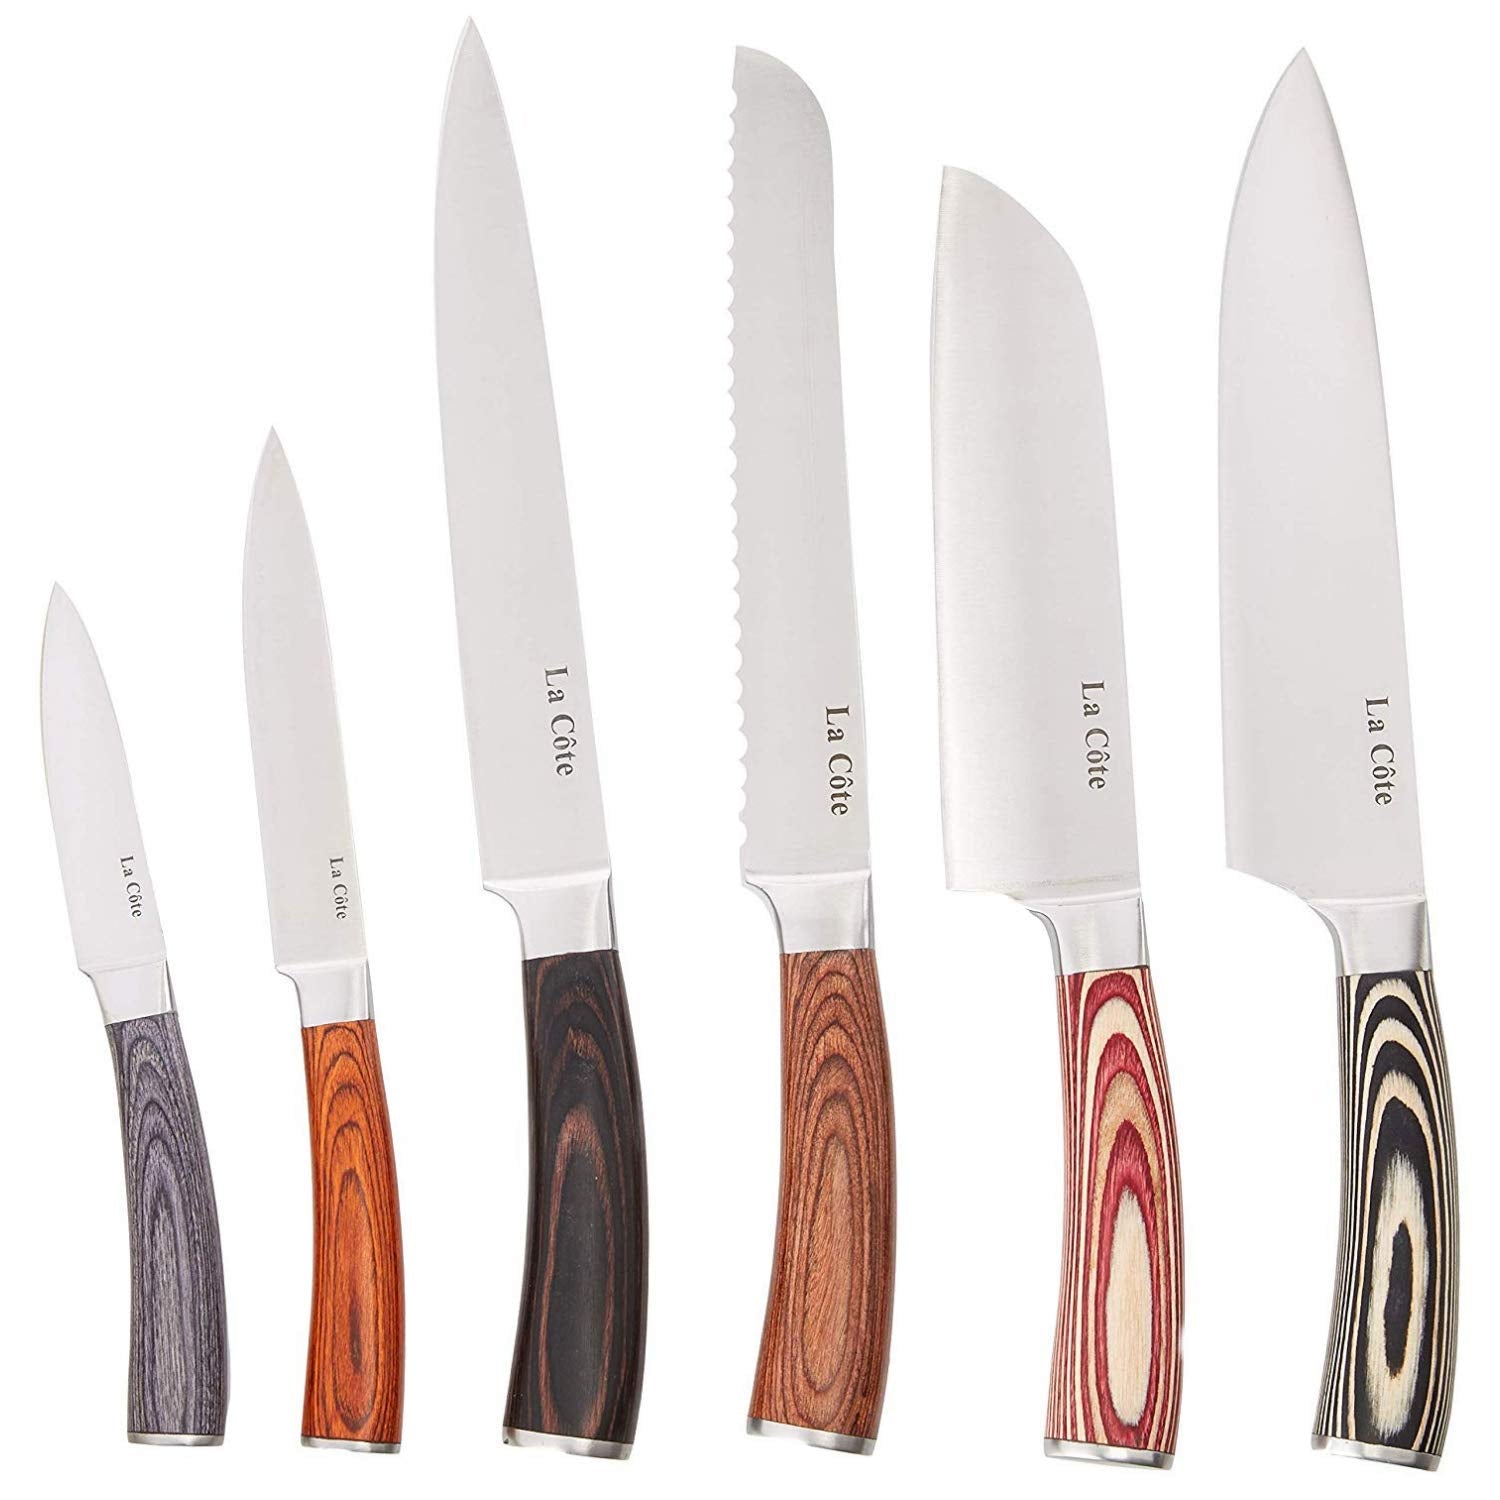 La Cote 6 Piece Chef Knives Set Japanese Stainless Steel Wood Handle in Gift Box (6 PC Chef Knife Set - Pakka Multi)